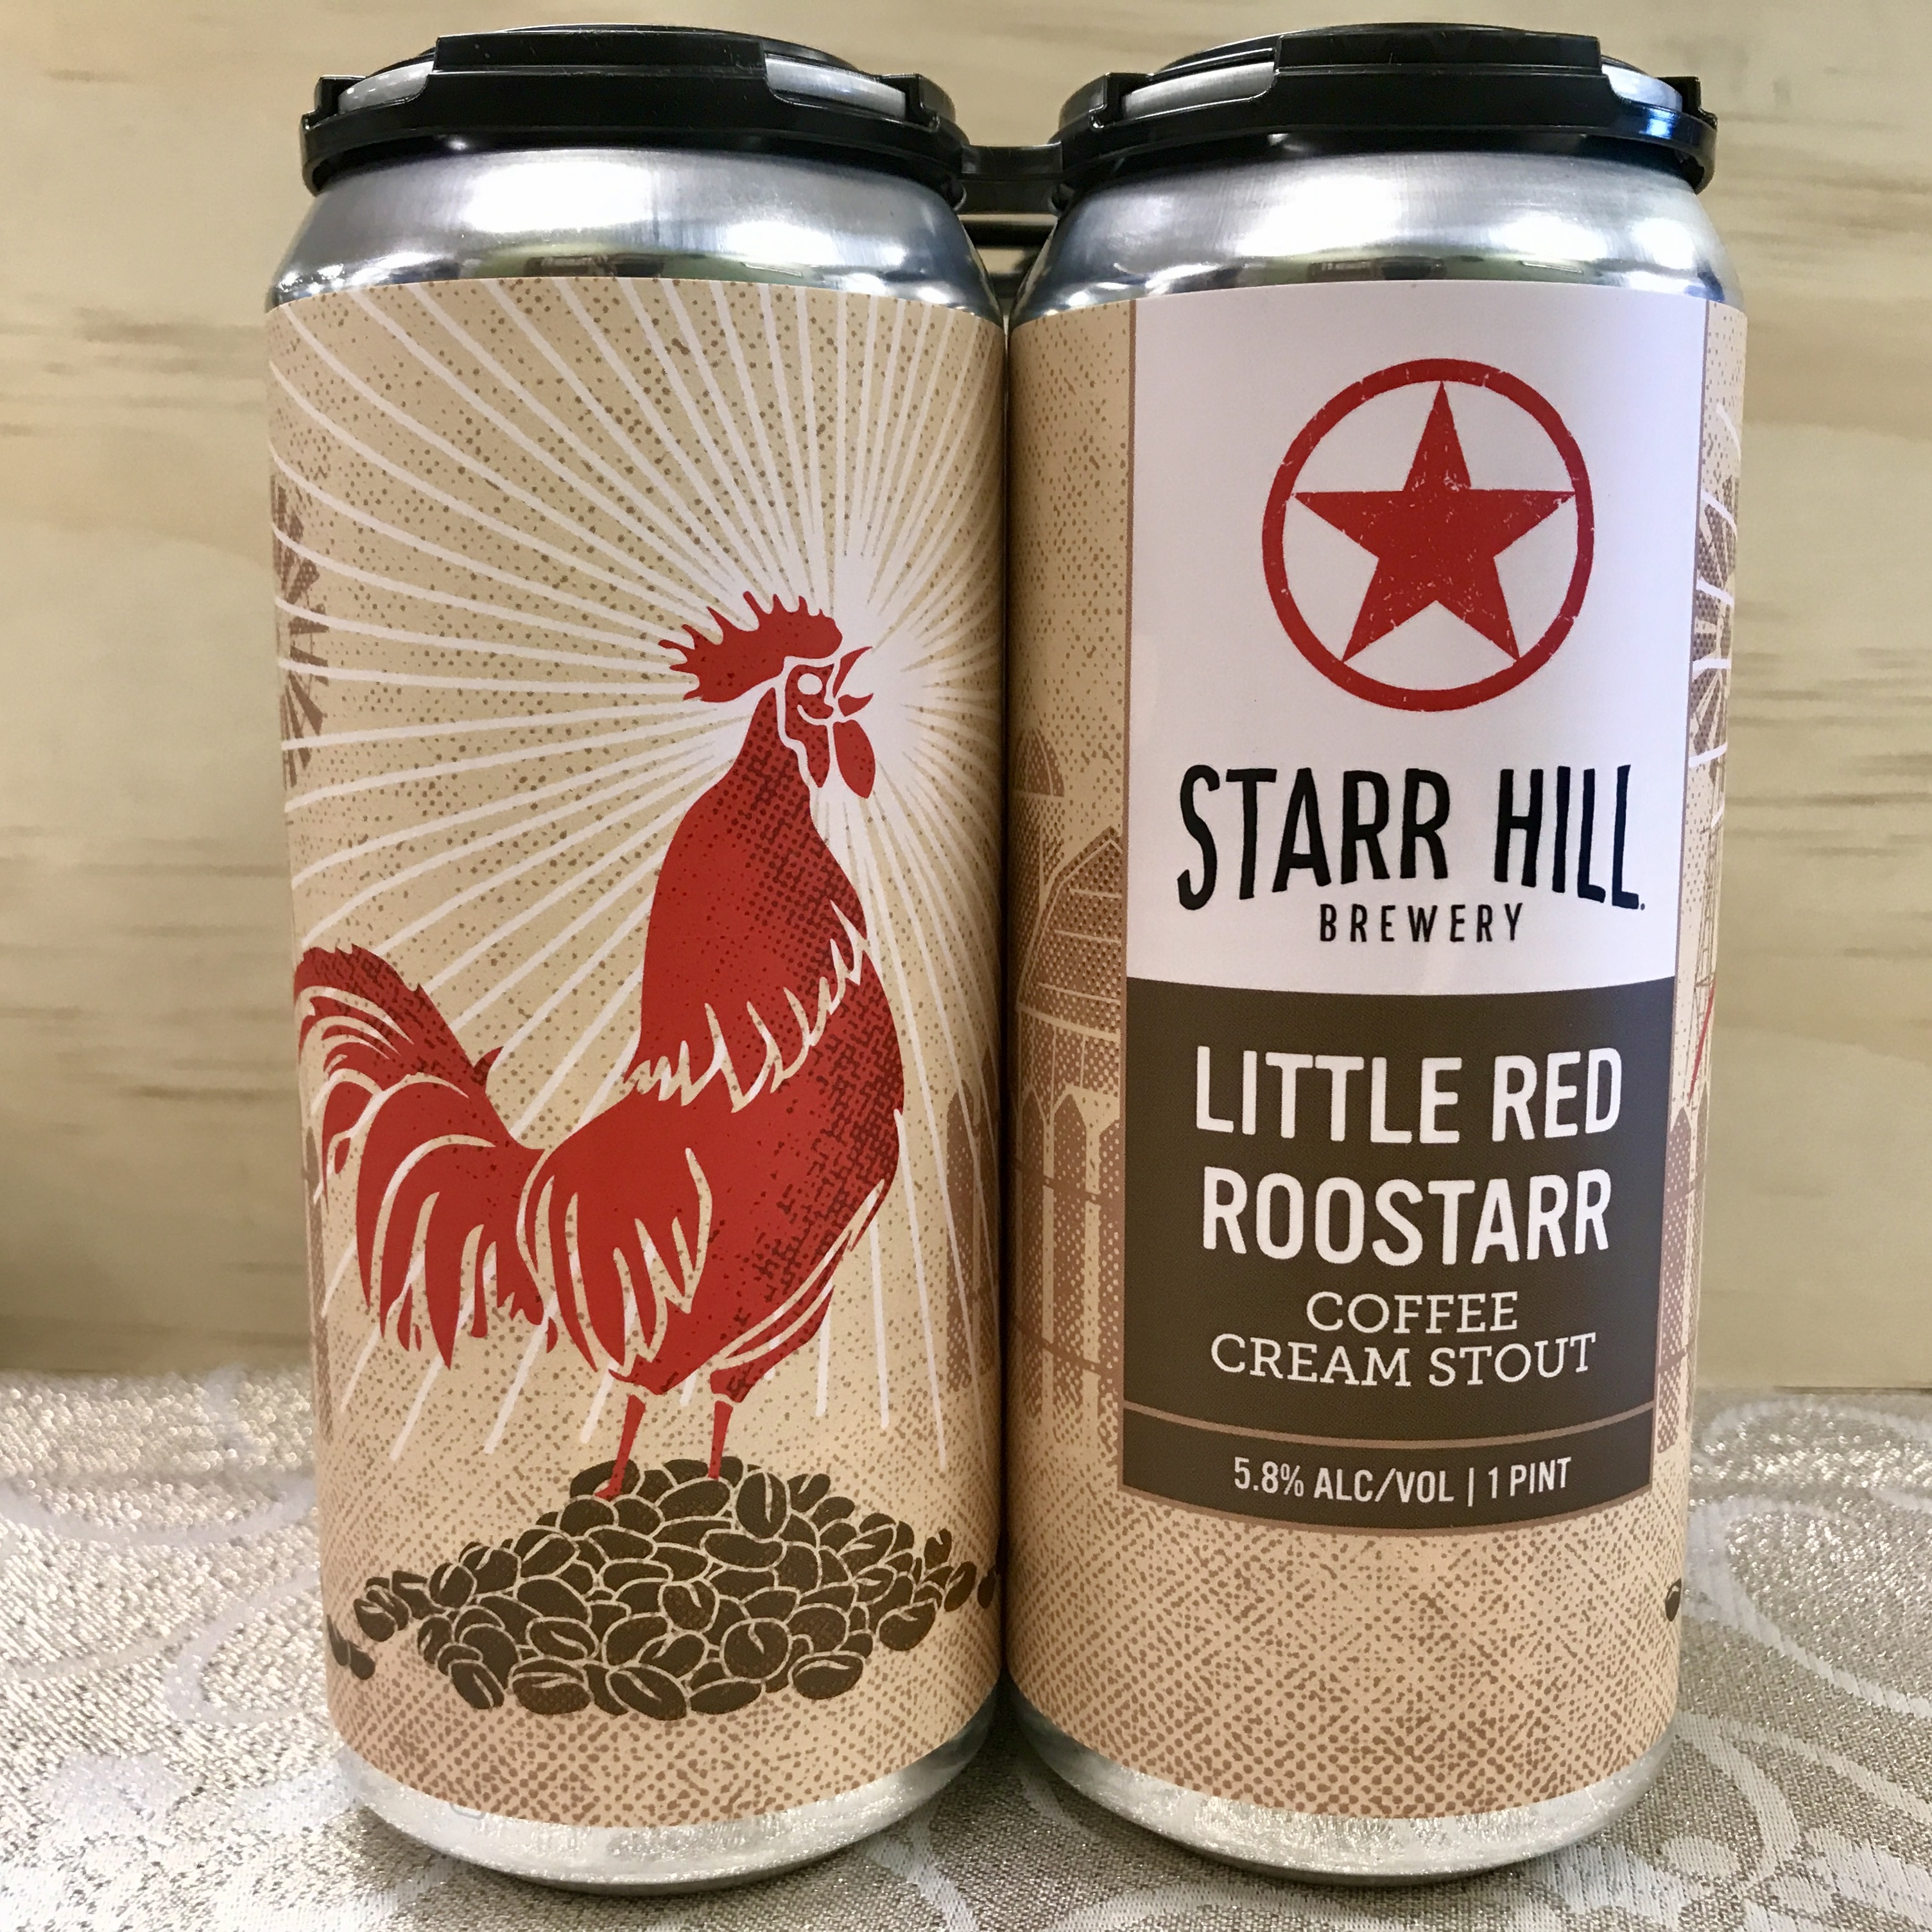 Starr Hill Little Red Rooster Coffee Cream Stout 4 x 16 oz cans